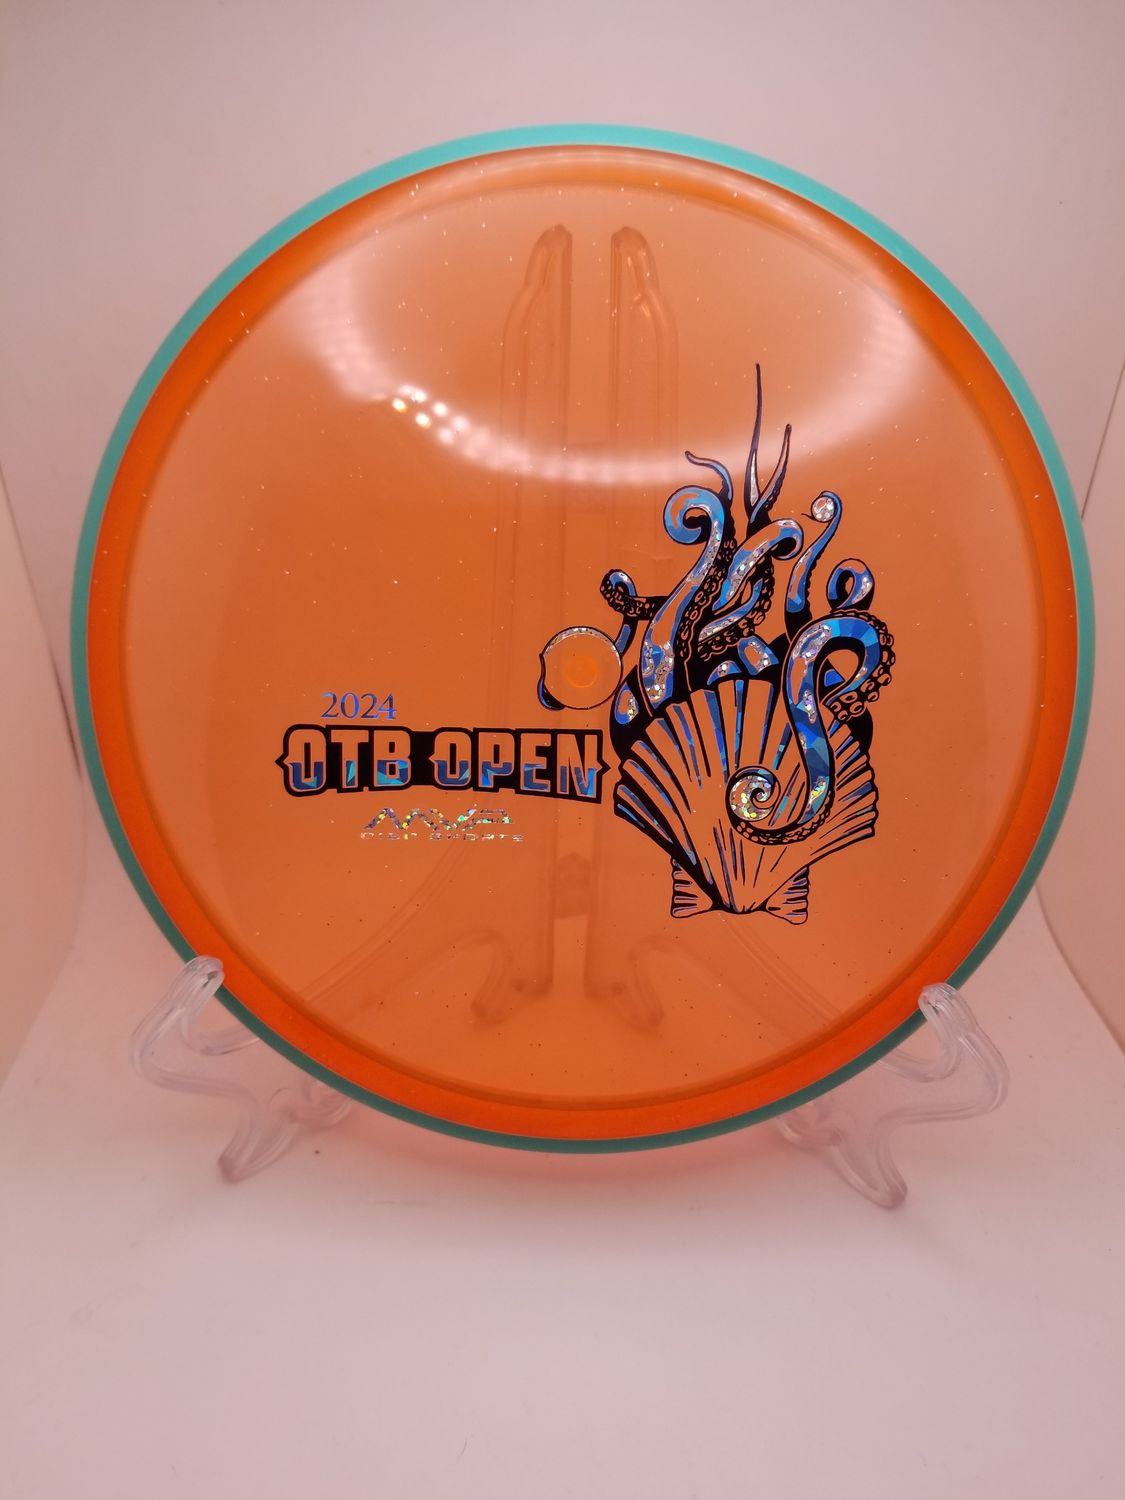 Axiom Discs Phase 1 2024 OTB Open Proton Soft Paradox Orange with Teal Blue Rim Weight: 174g